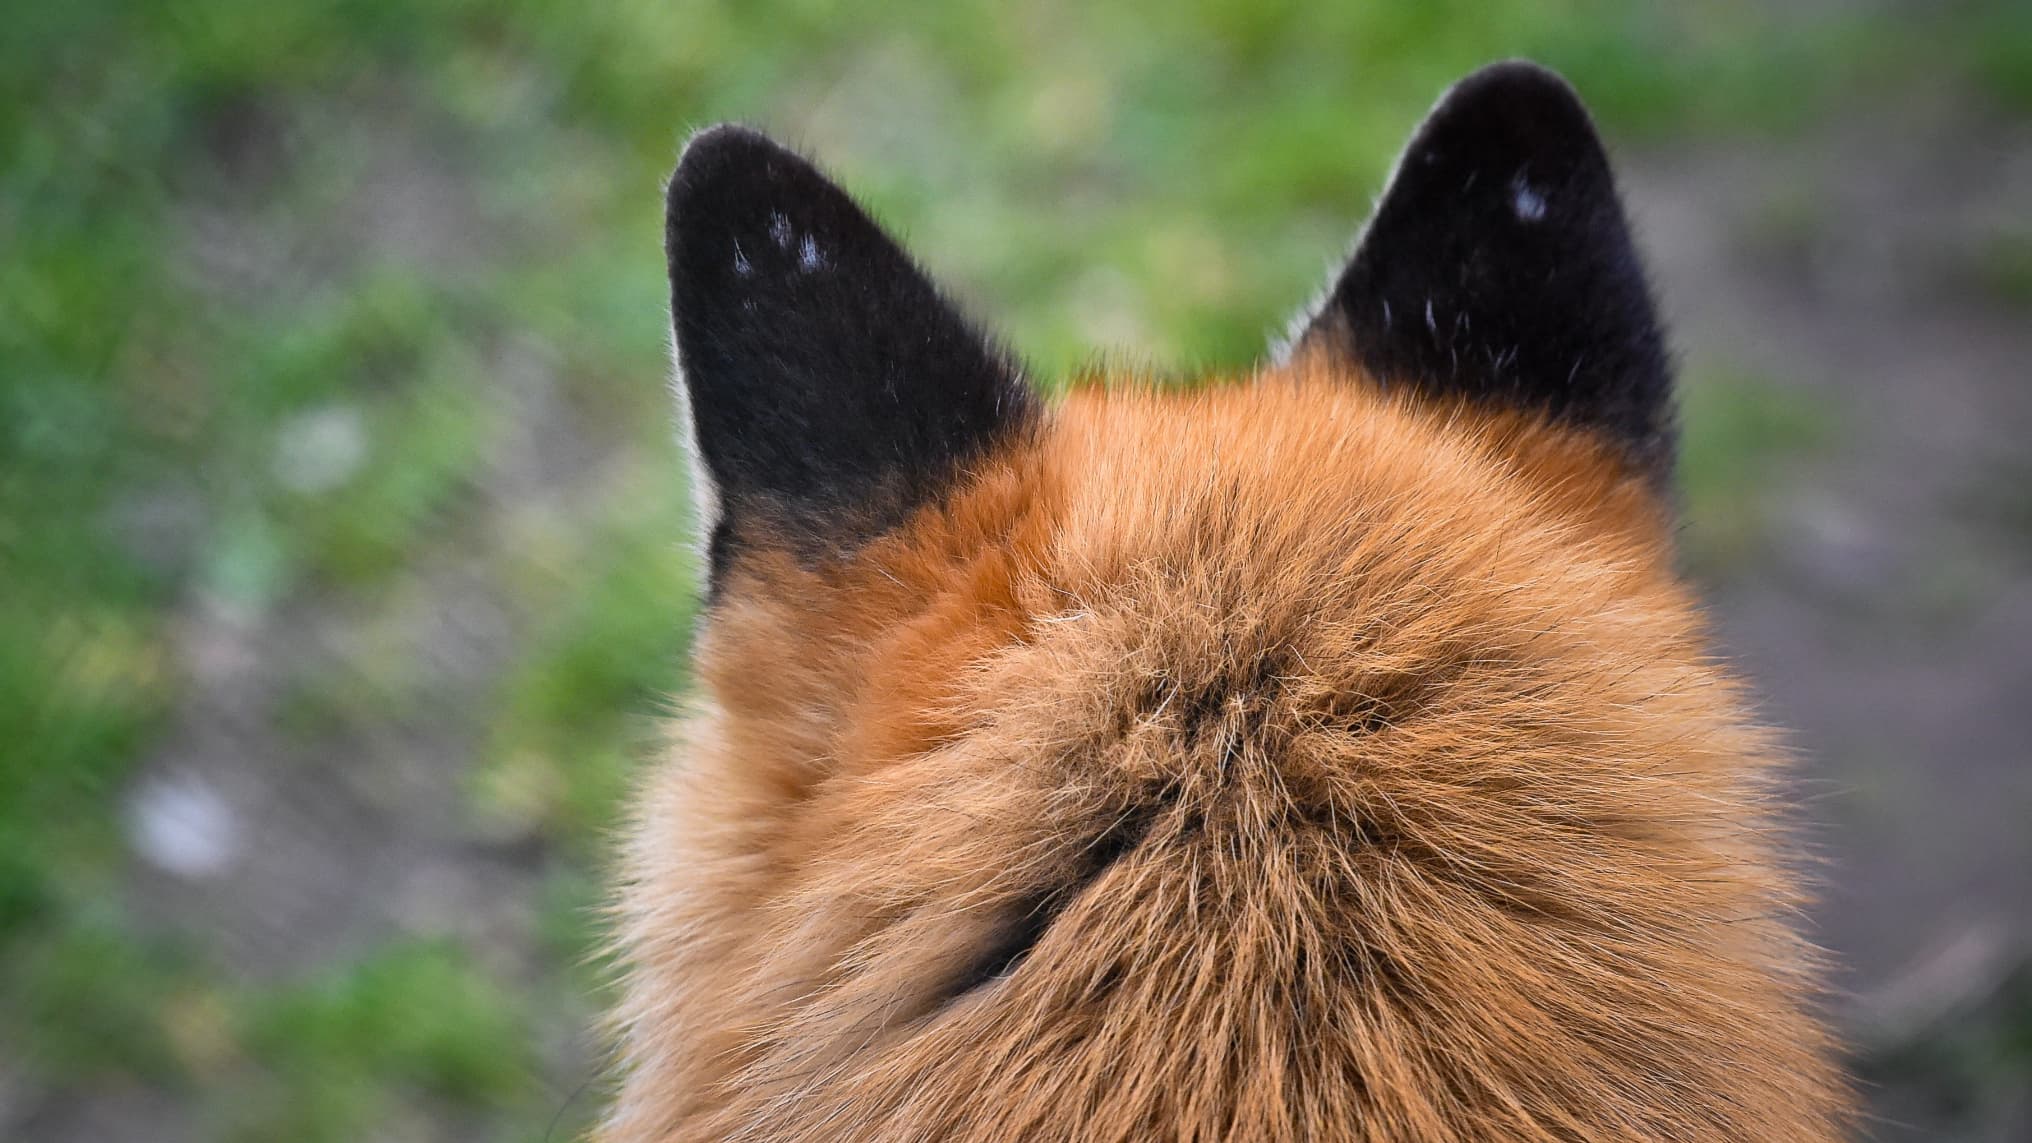 The study shows that the fox may have been domesticated as a pet